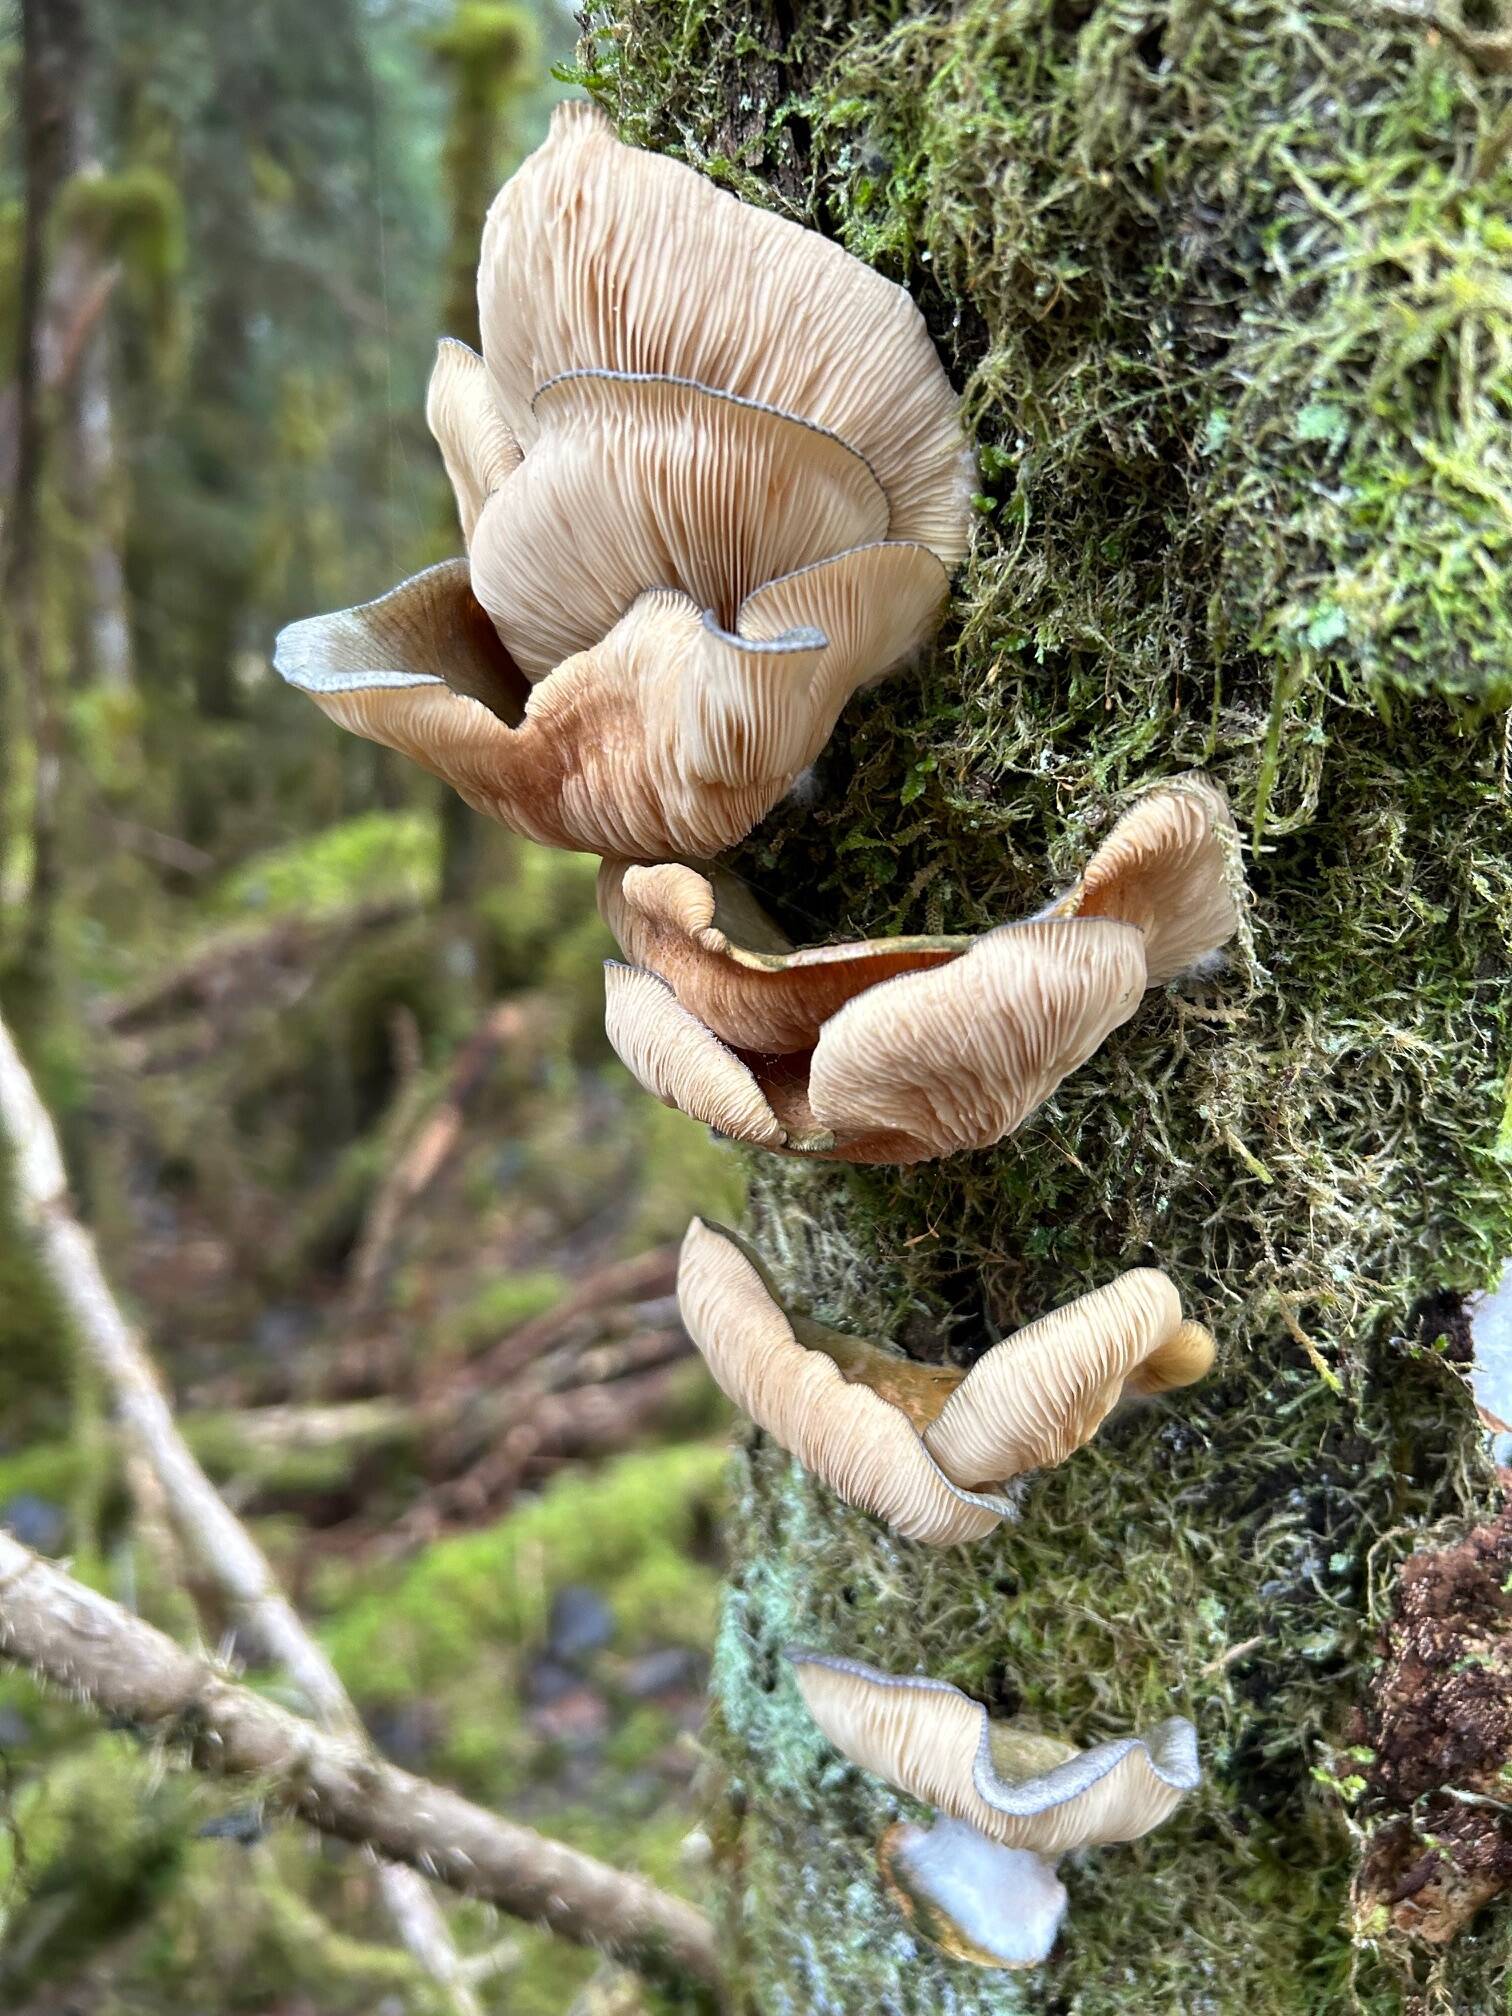 Green oyster mushrooms along the East Glacier Trail, submitted on Dec. 5. (Photo by Deborah Rudis)